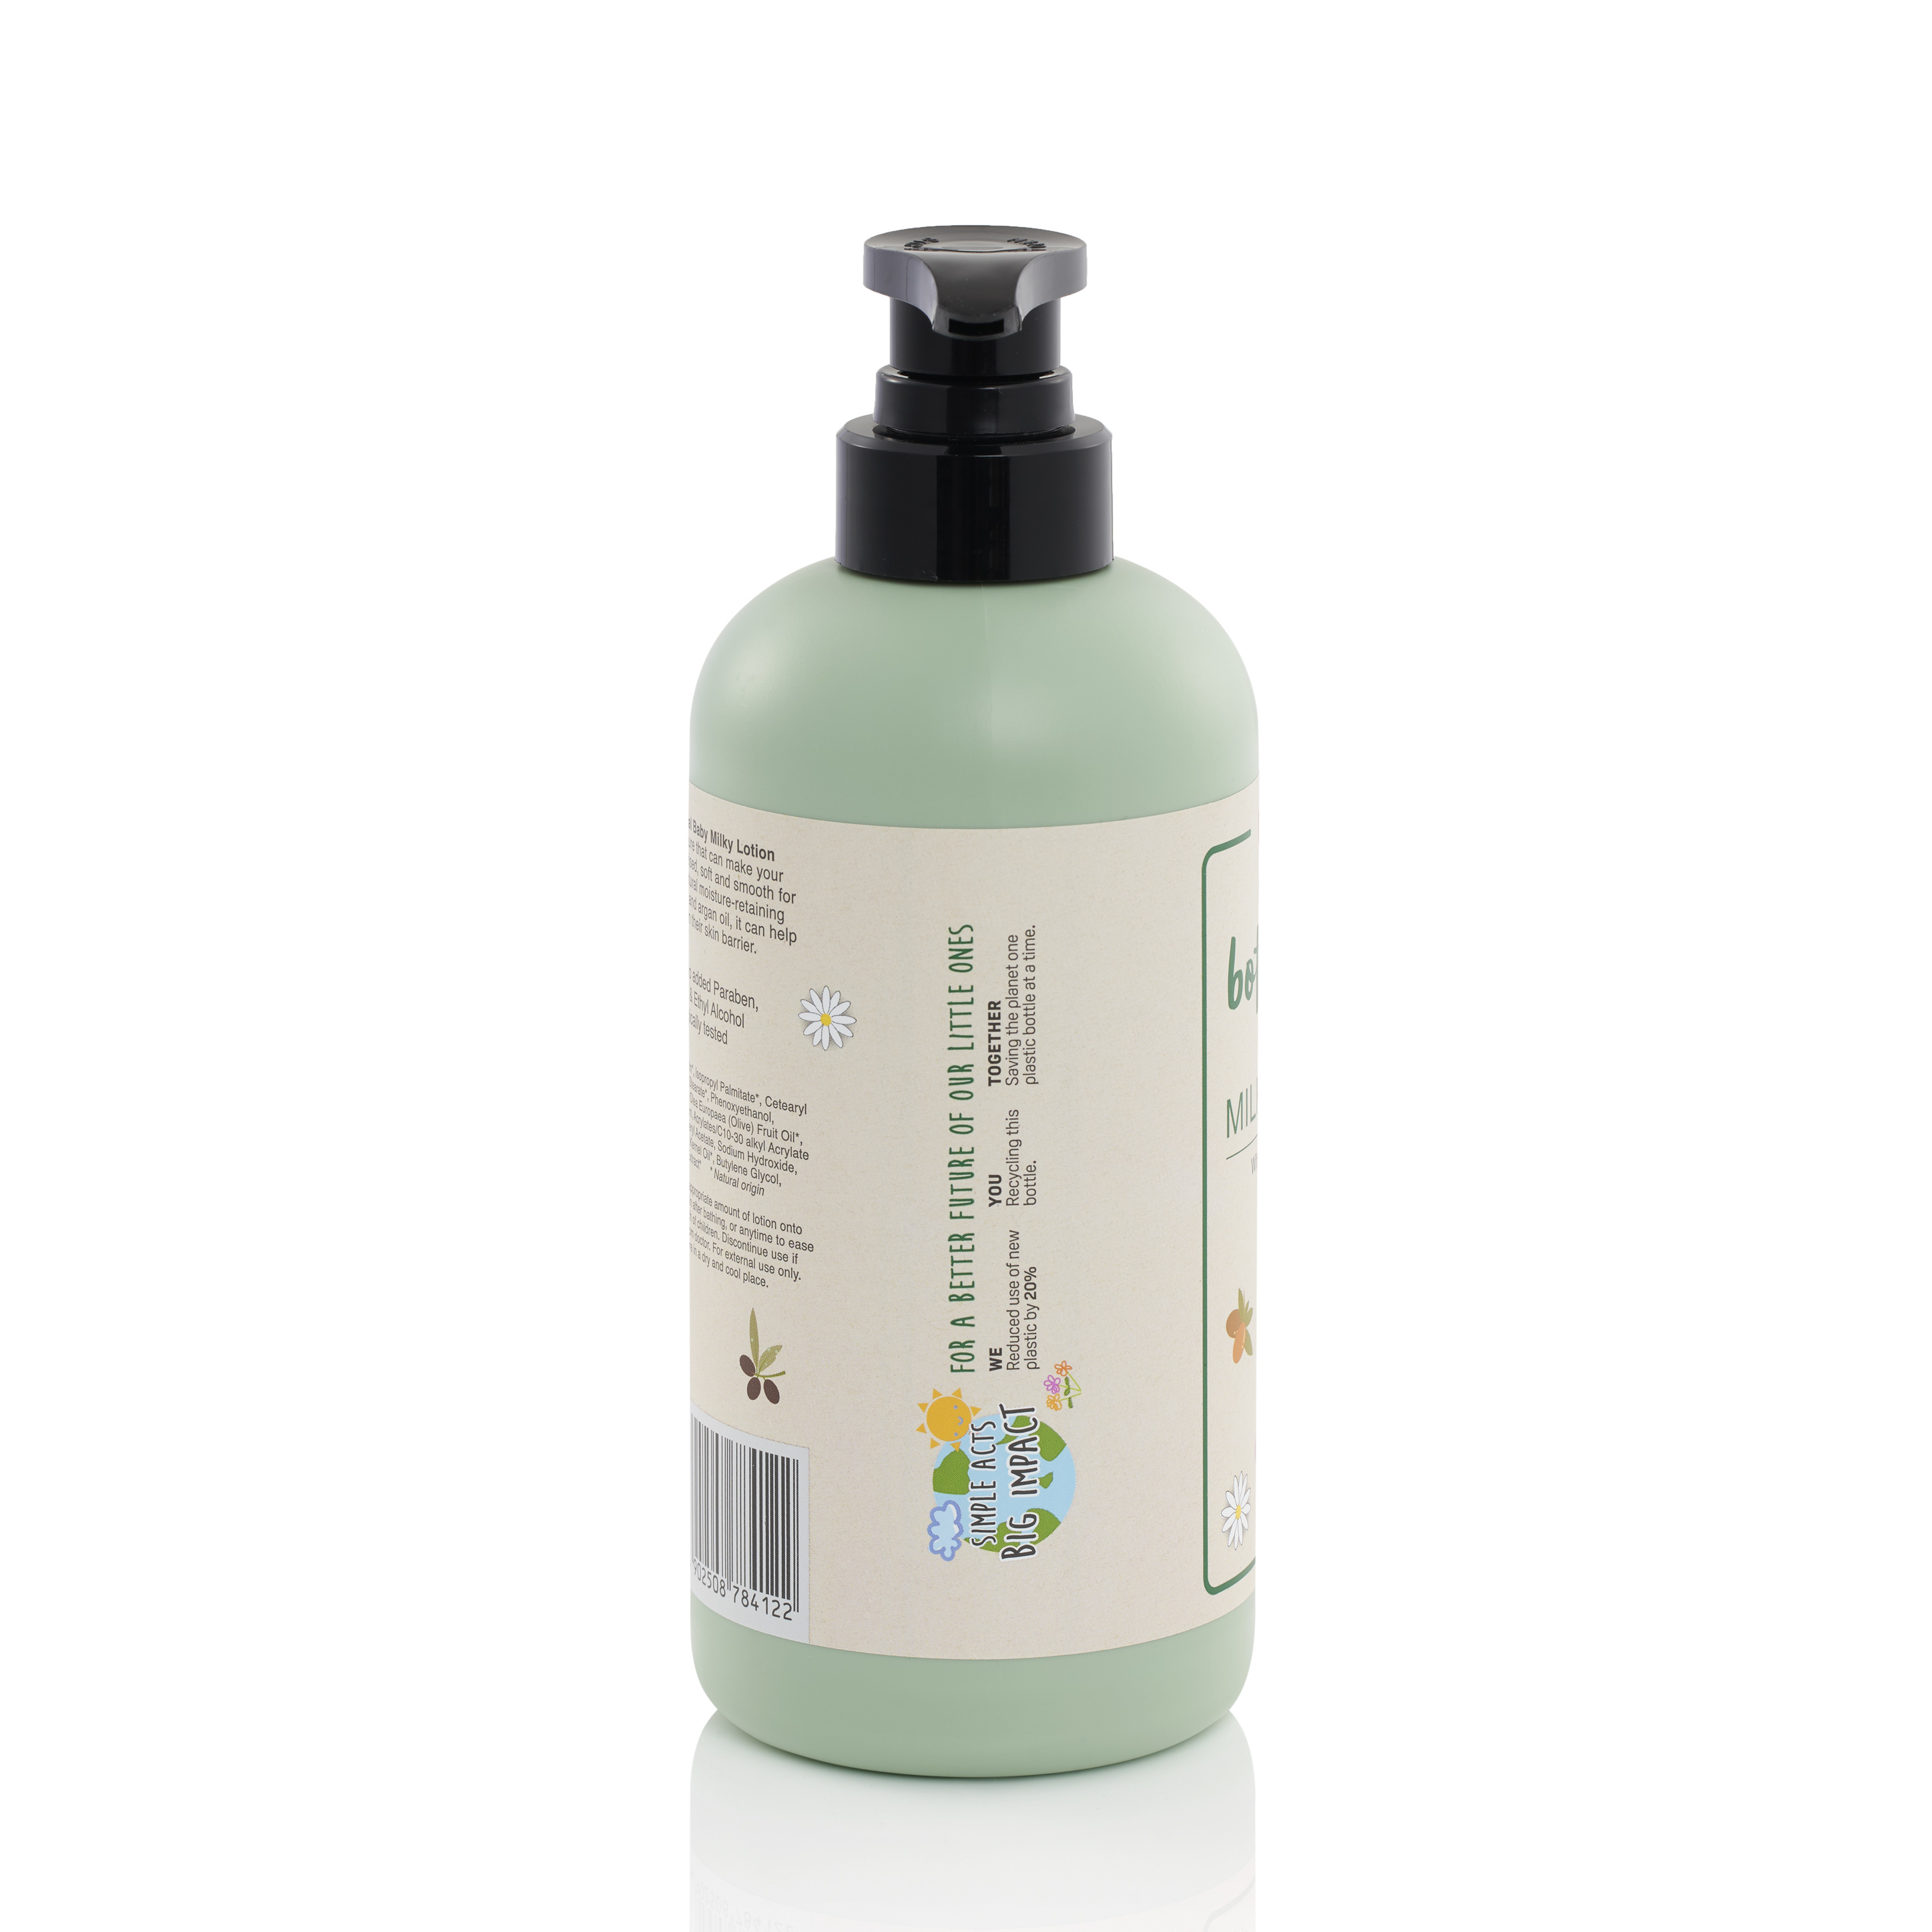 Pigeon Natural Botanical Baby Milky Lotion 500ml (PG-78412)